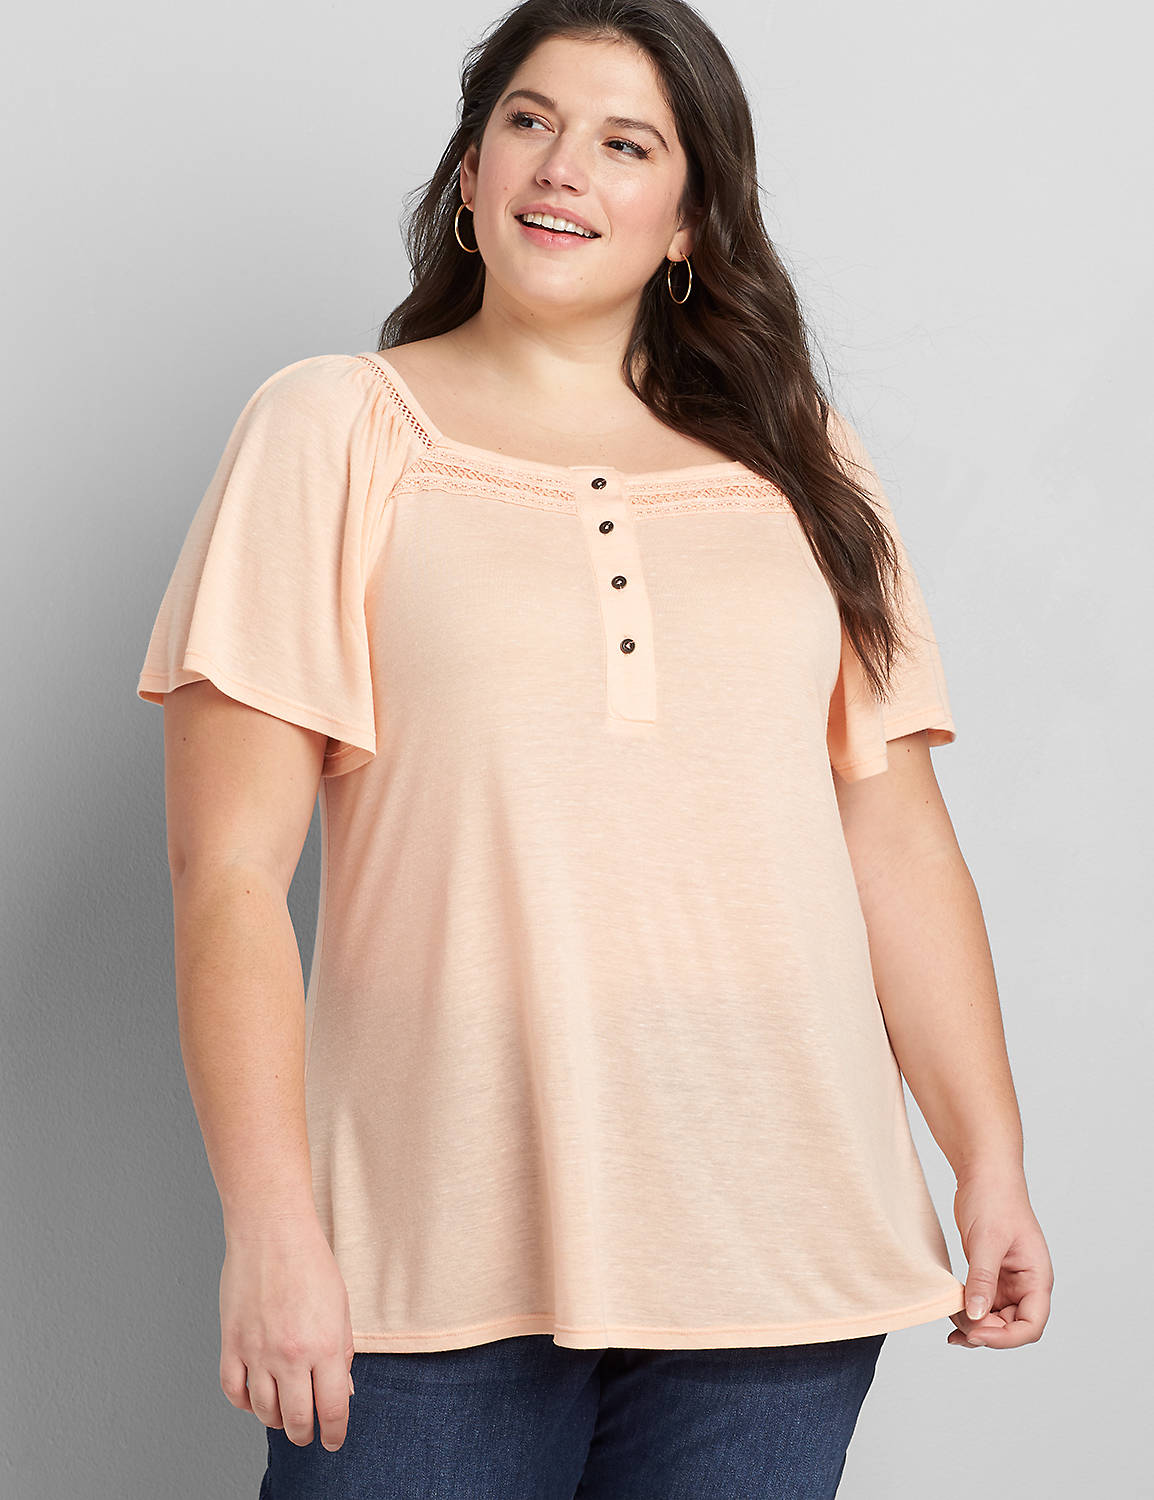 Short Sleeve Elastic Square Neck Top With Buttons 1119620:Sunset Pink Pearl 40-0005-11:18/20 Product Image 1